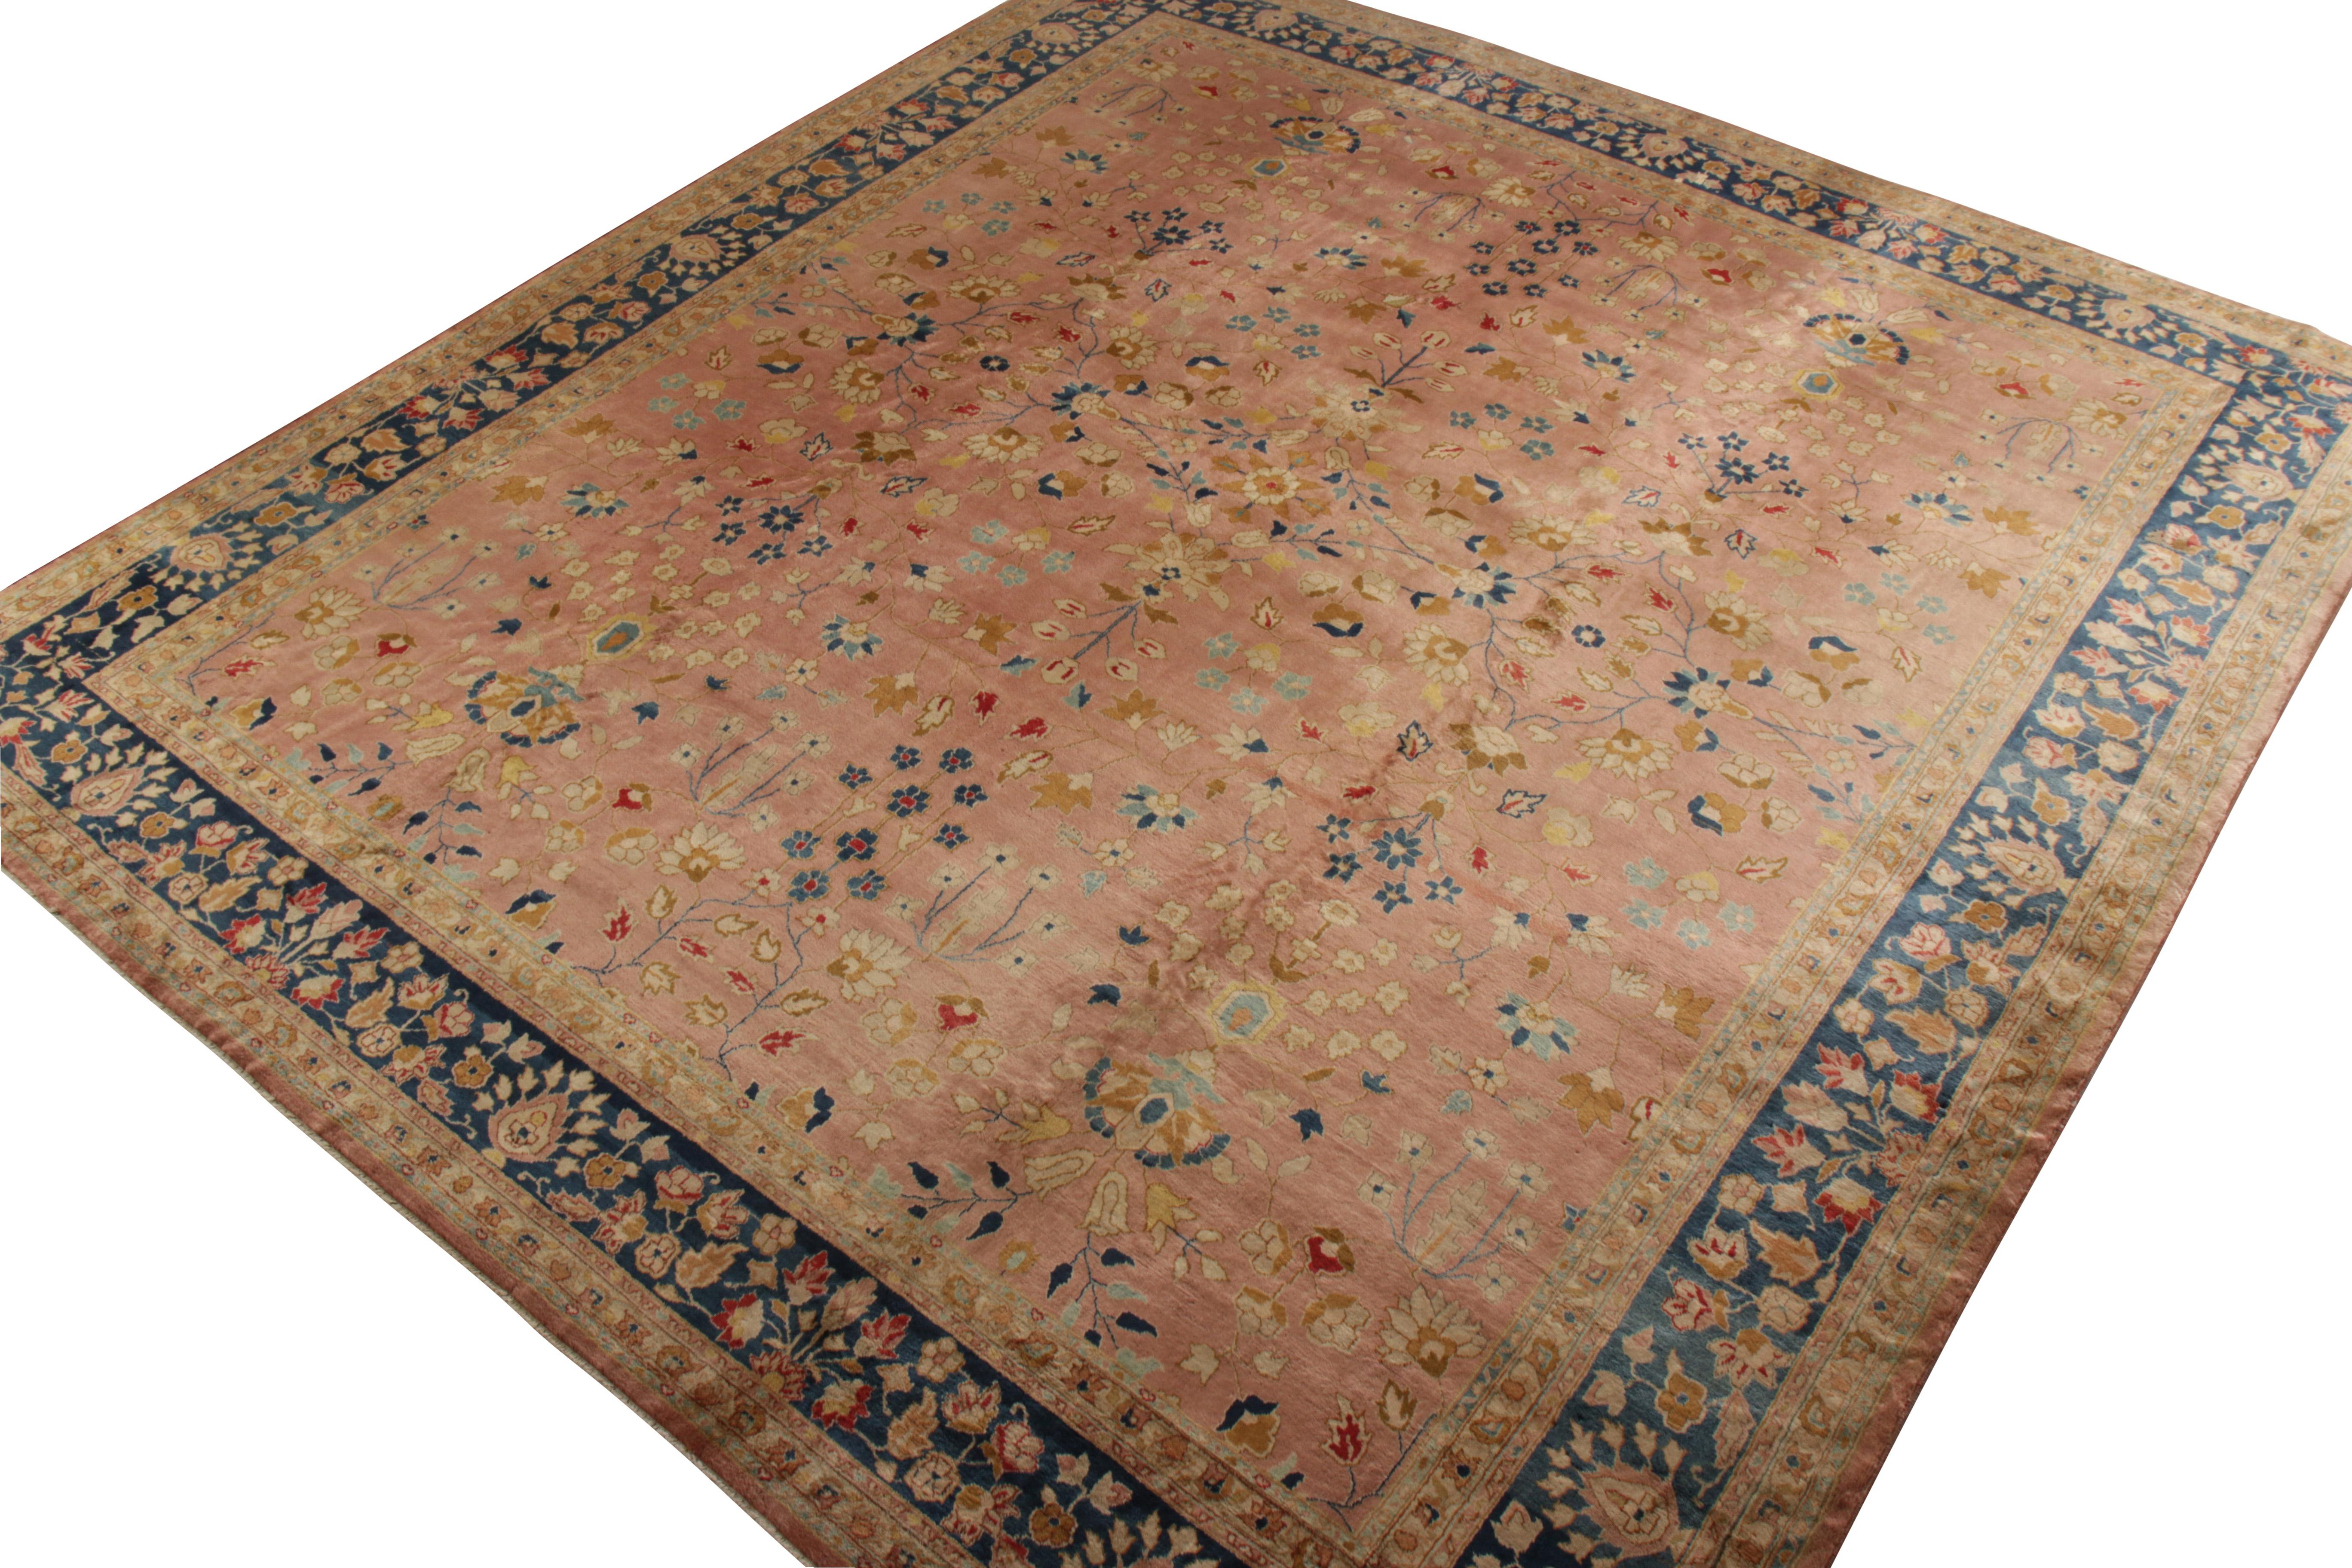 Hand knotted in wool originating circa 1910-1920, this 13 x 14 antique rug connotes a rare Oushak rug design, both in uncommon dimensions as a square rug as well as in the emphasis on a joyful pink colorway. 

On the design: Normally an atypical